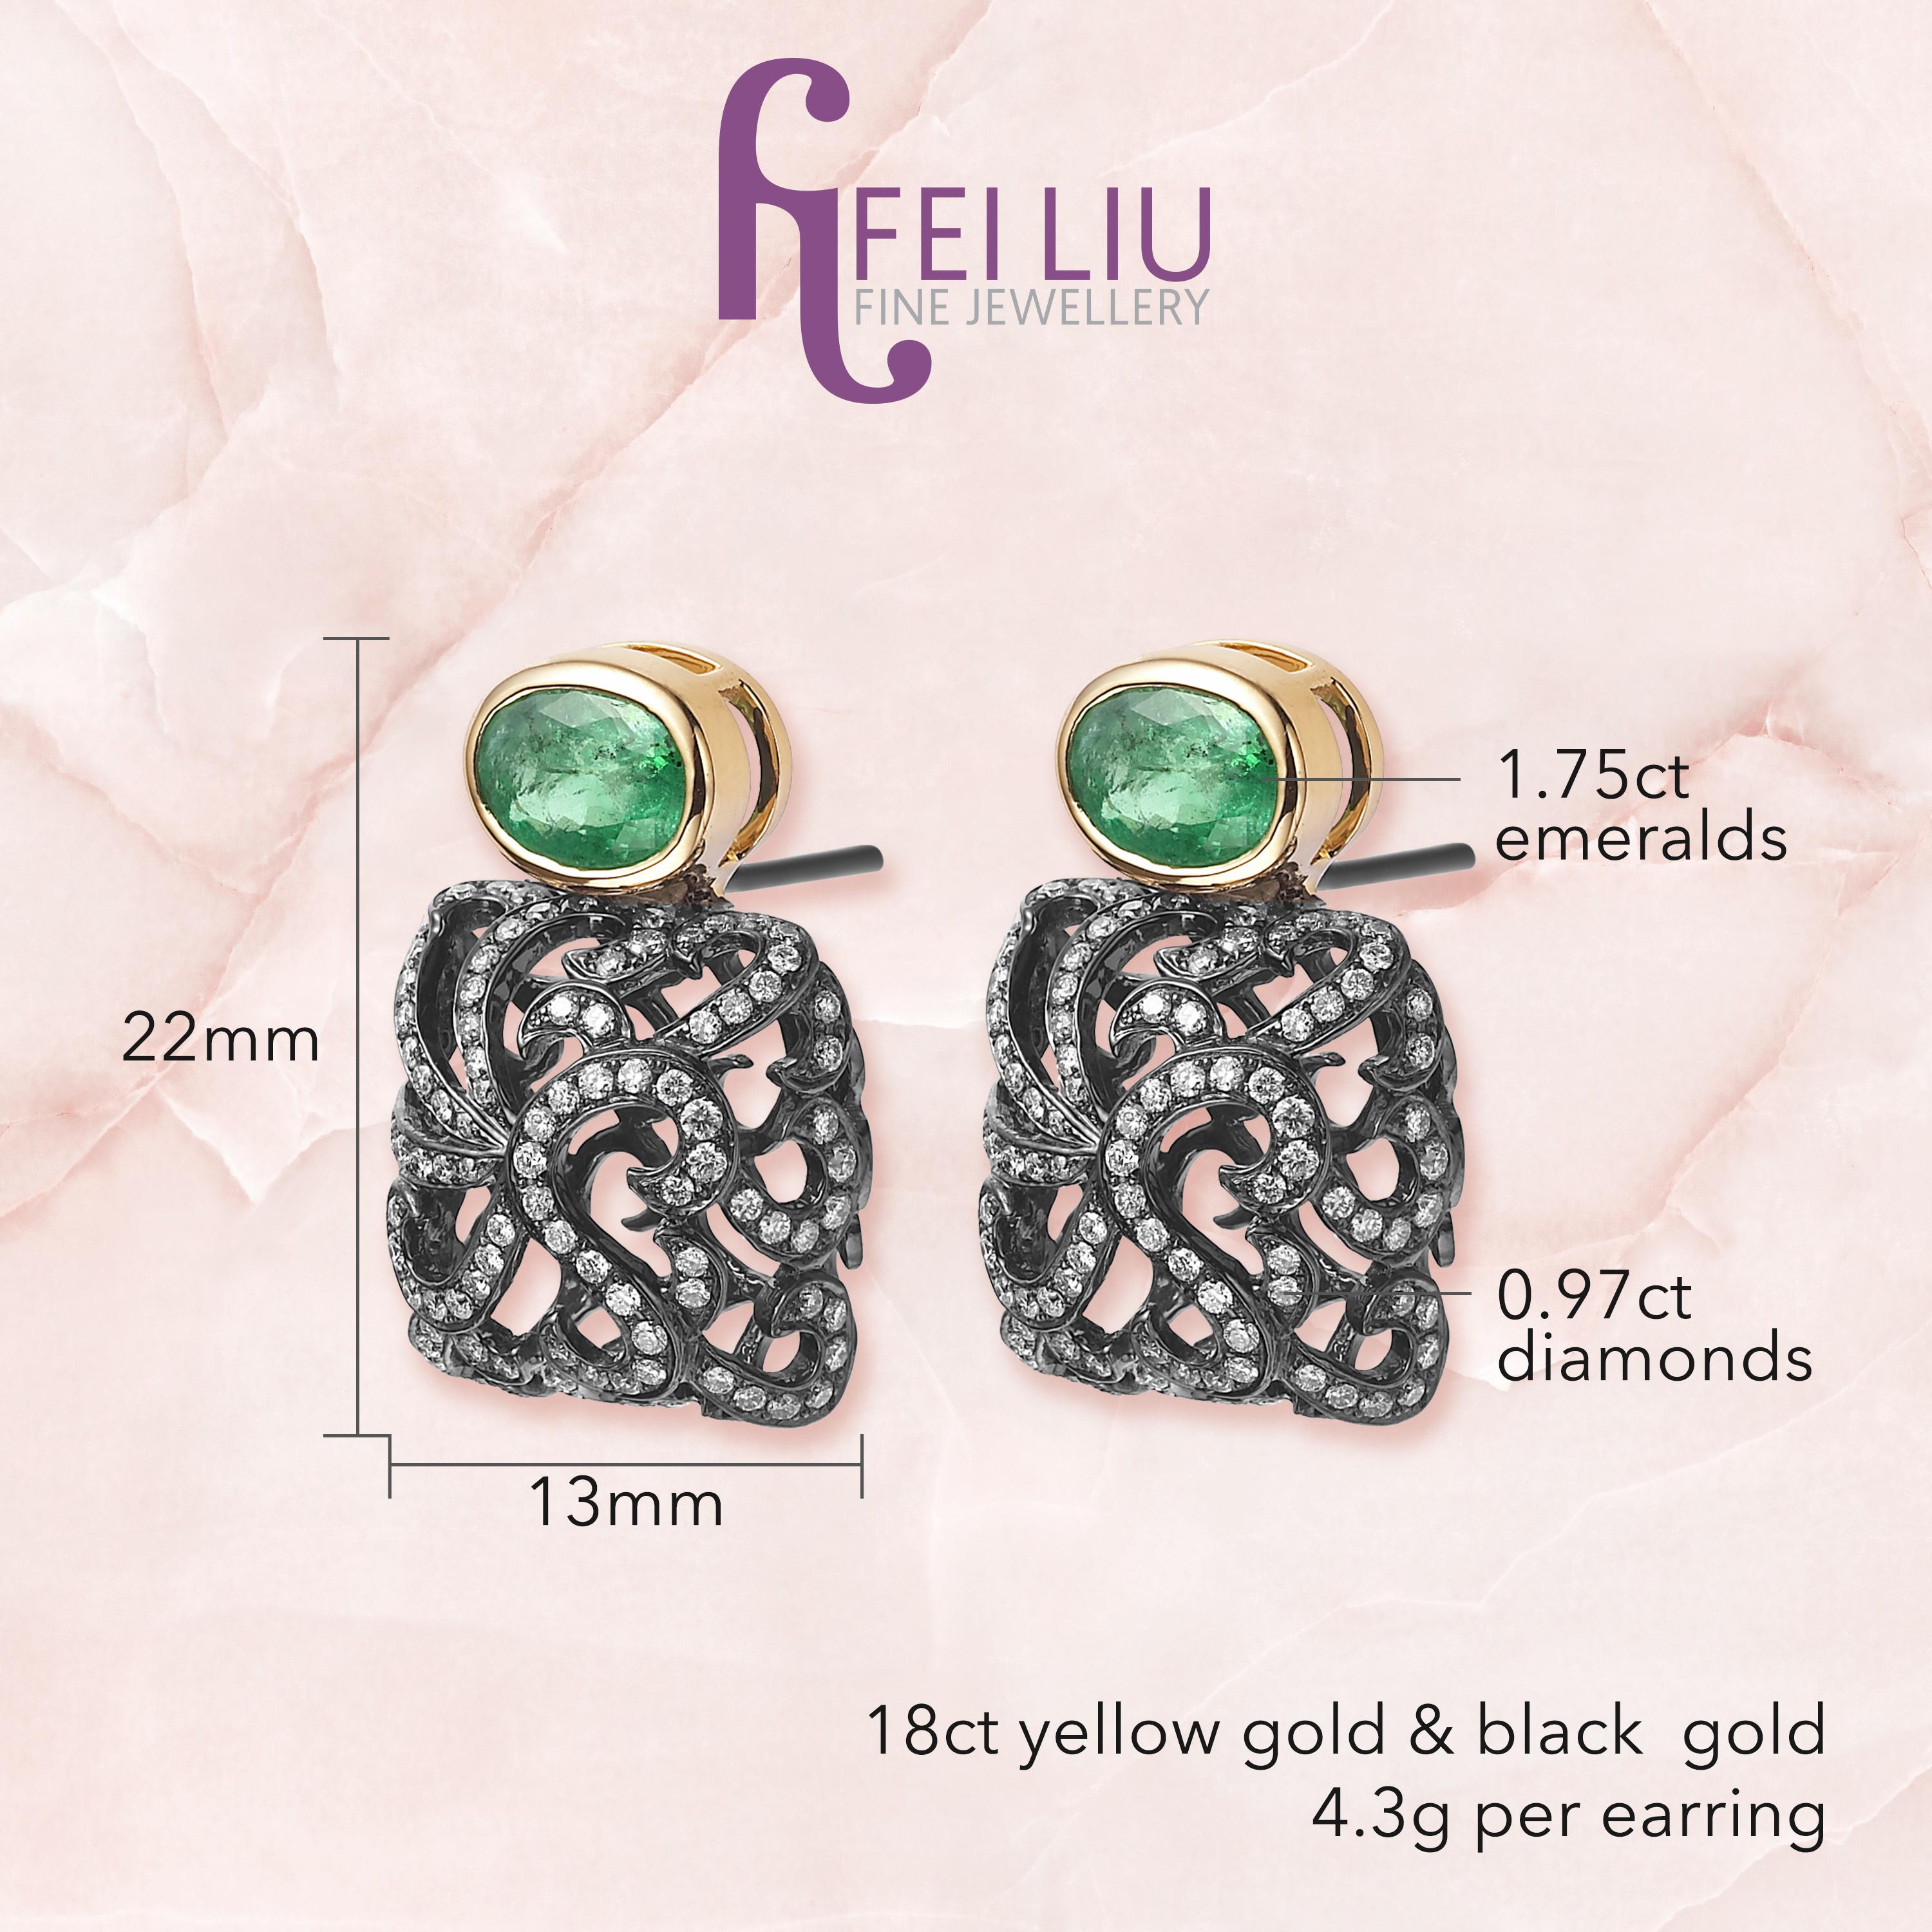 Description:
One-off open cushion filigree stud earrings with 1.75ct oval cut green emerald set in 18ct yellow gold and 0.97ct white diamonds set in 18ct black gold.

Inspiration:
Emulating femininity and glamour, the Whispering collection is full